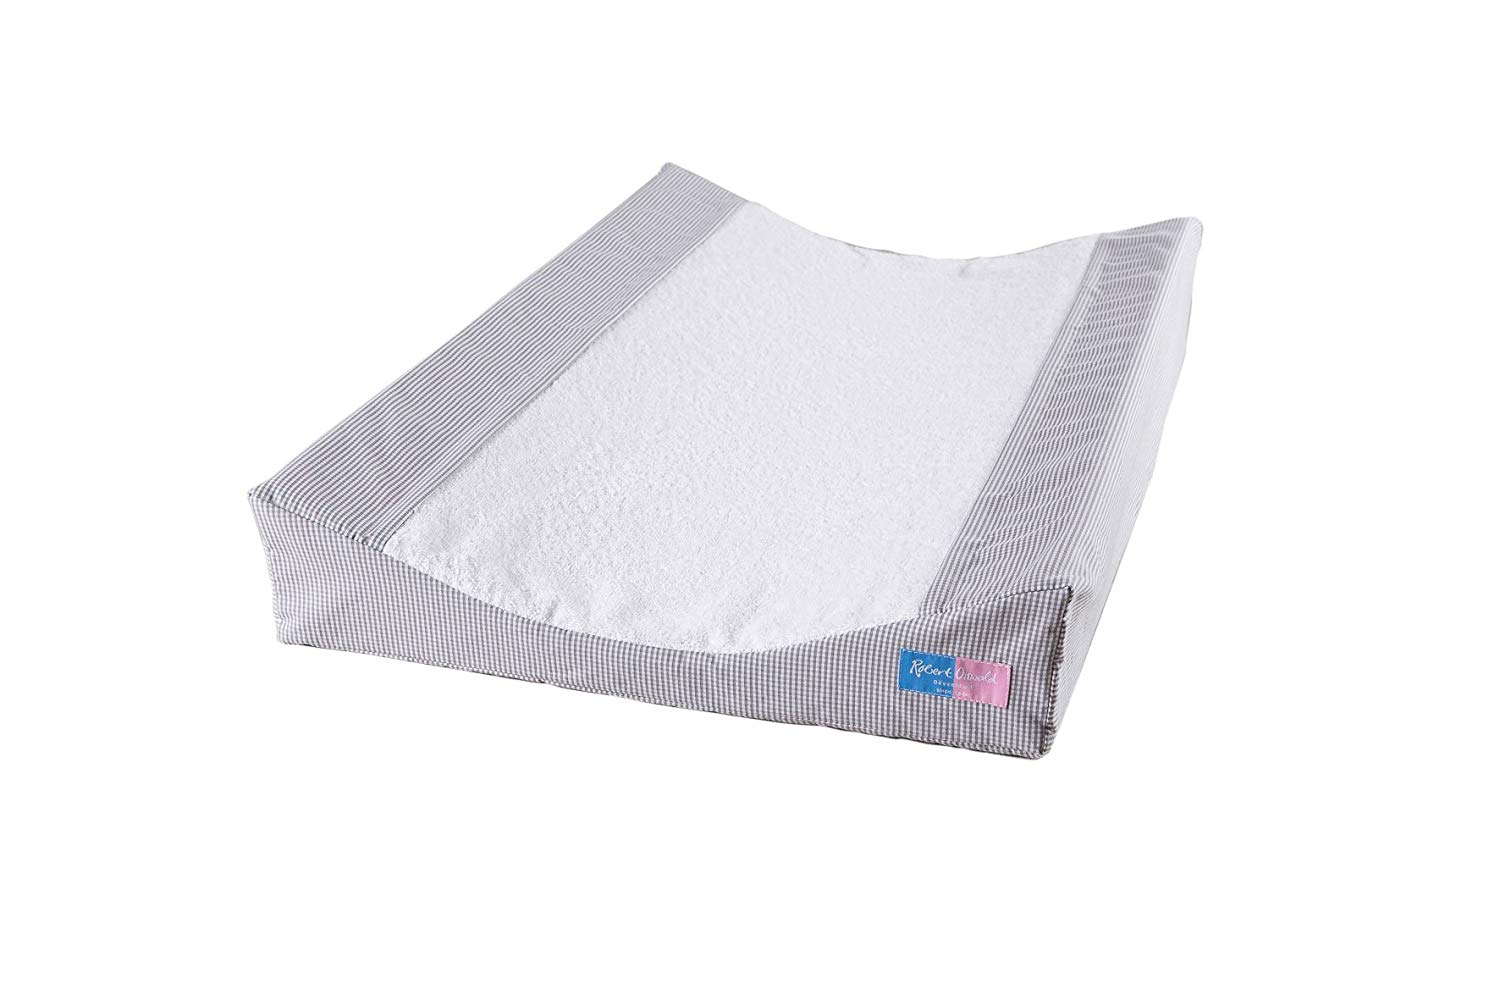 Robert Osswald 1.4.1.3.1.1.1-K05-13 Changing Mat 2-Wedge with Terry Cloth Cover and Inlet 45 cm x 70 cm Blue